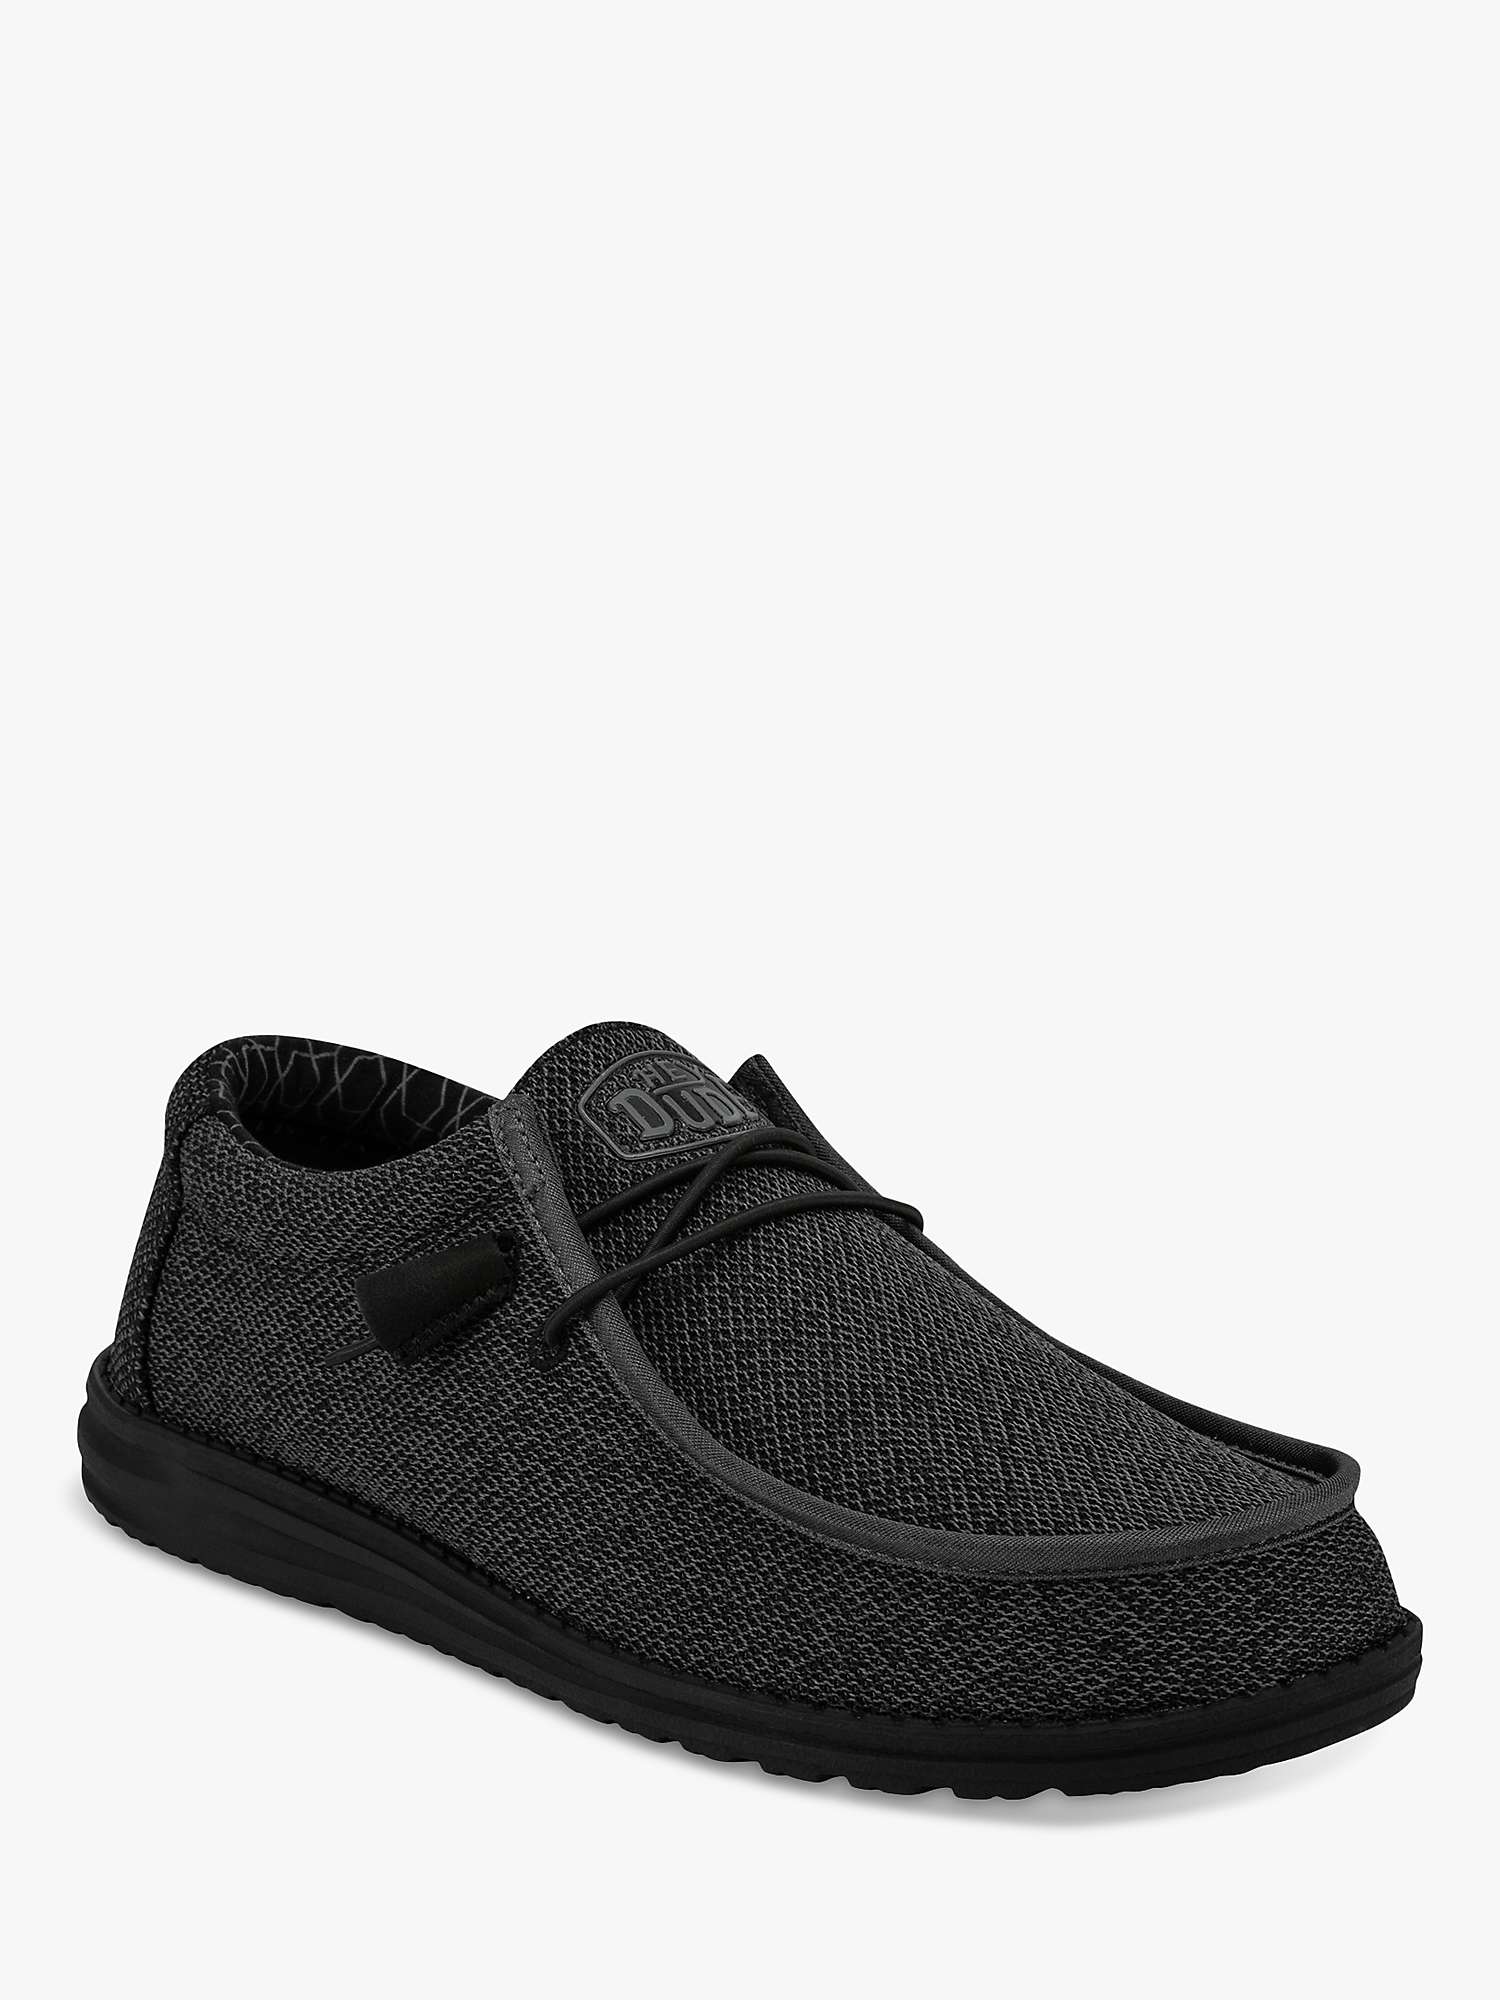 Buy Hey Dude Wally Sox Casual Shoes Online at johnlewis.com